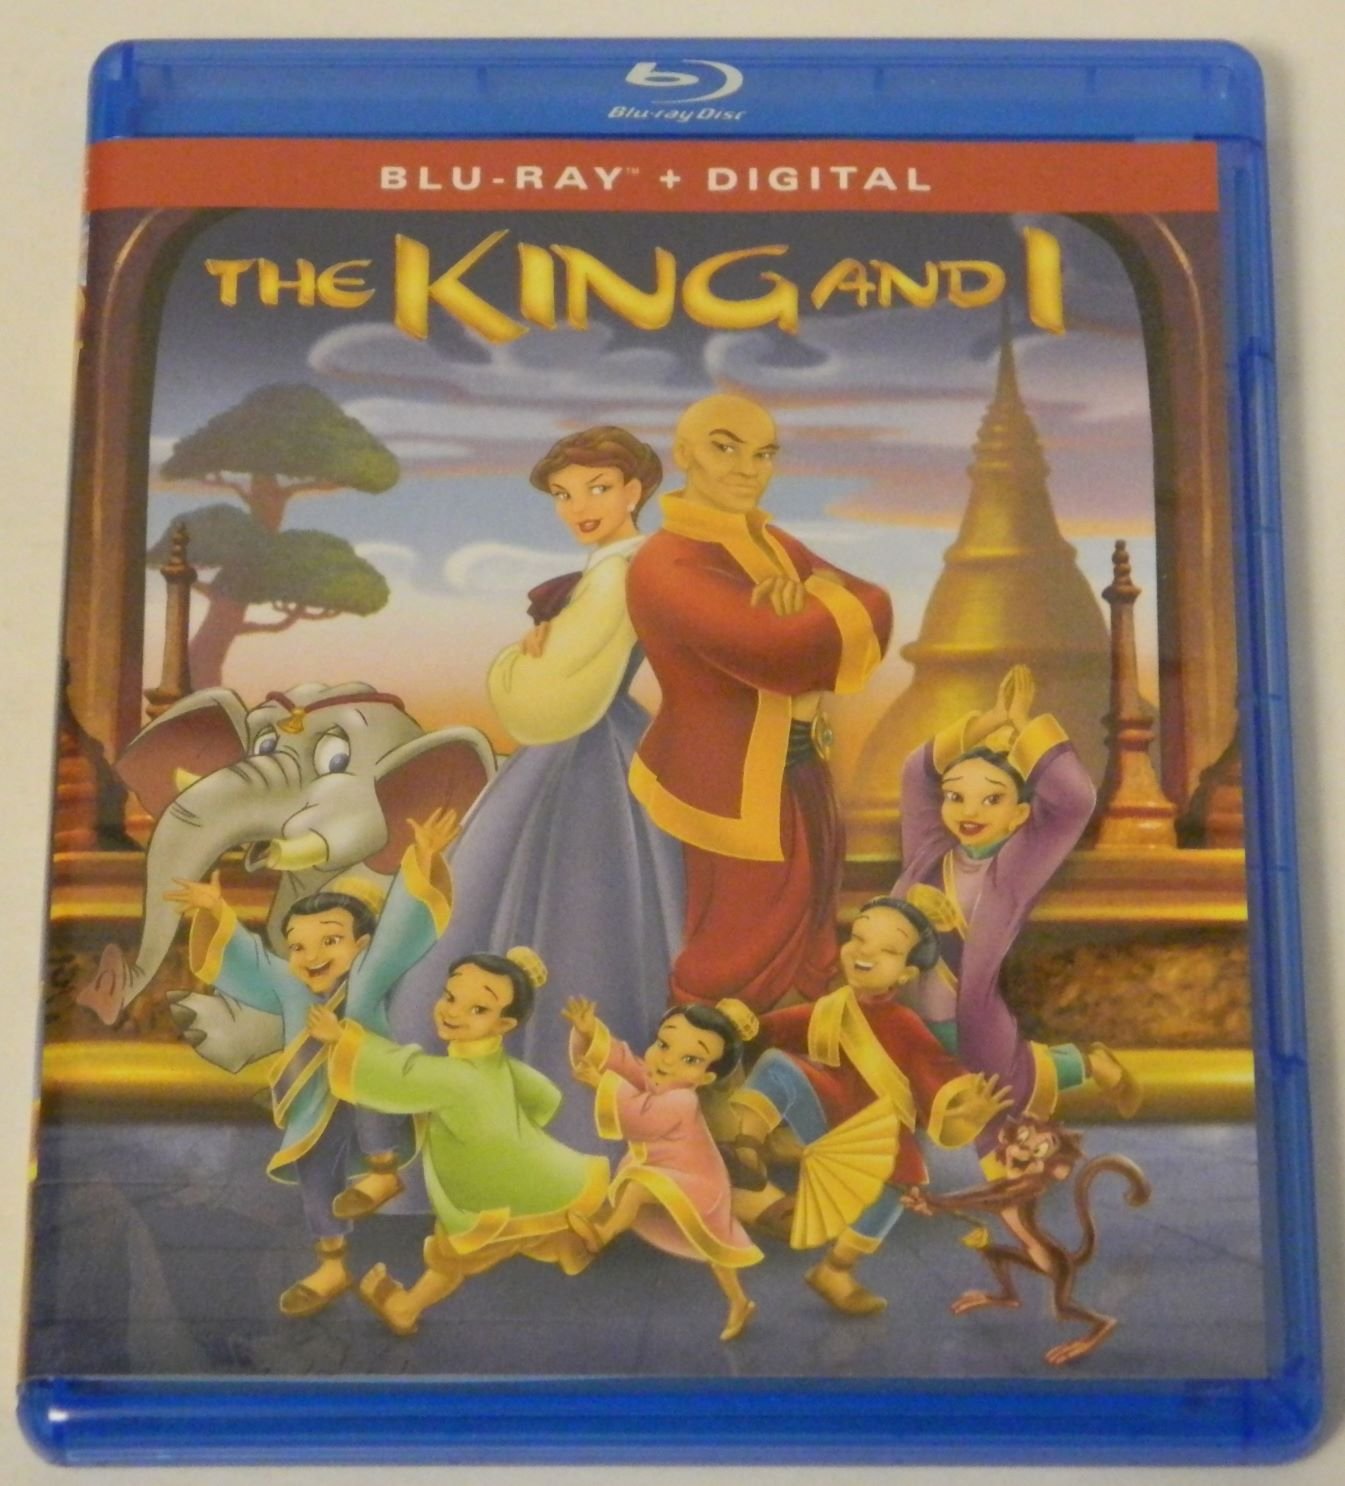 The King and I (1999) Blu-ray Review